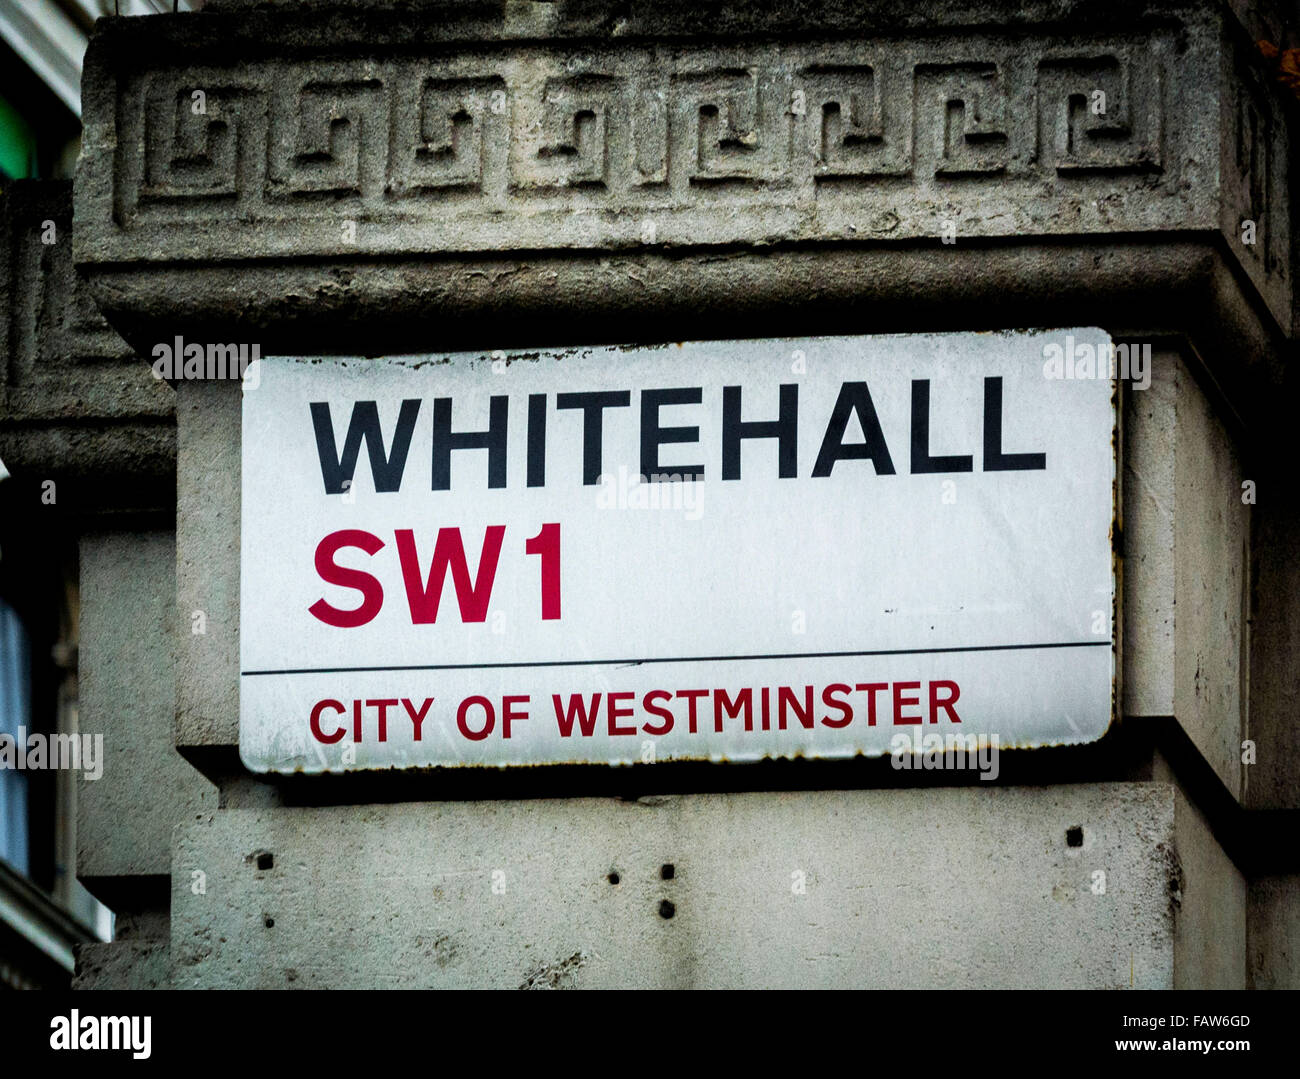 Whitehall SW1, City of Westminster, sign in London, UK. Stock Photo